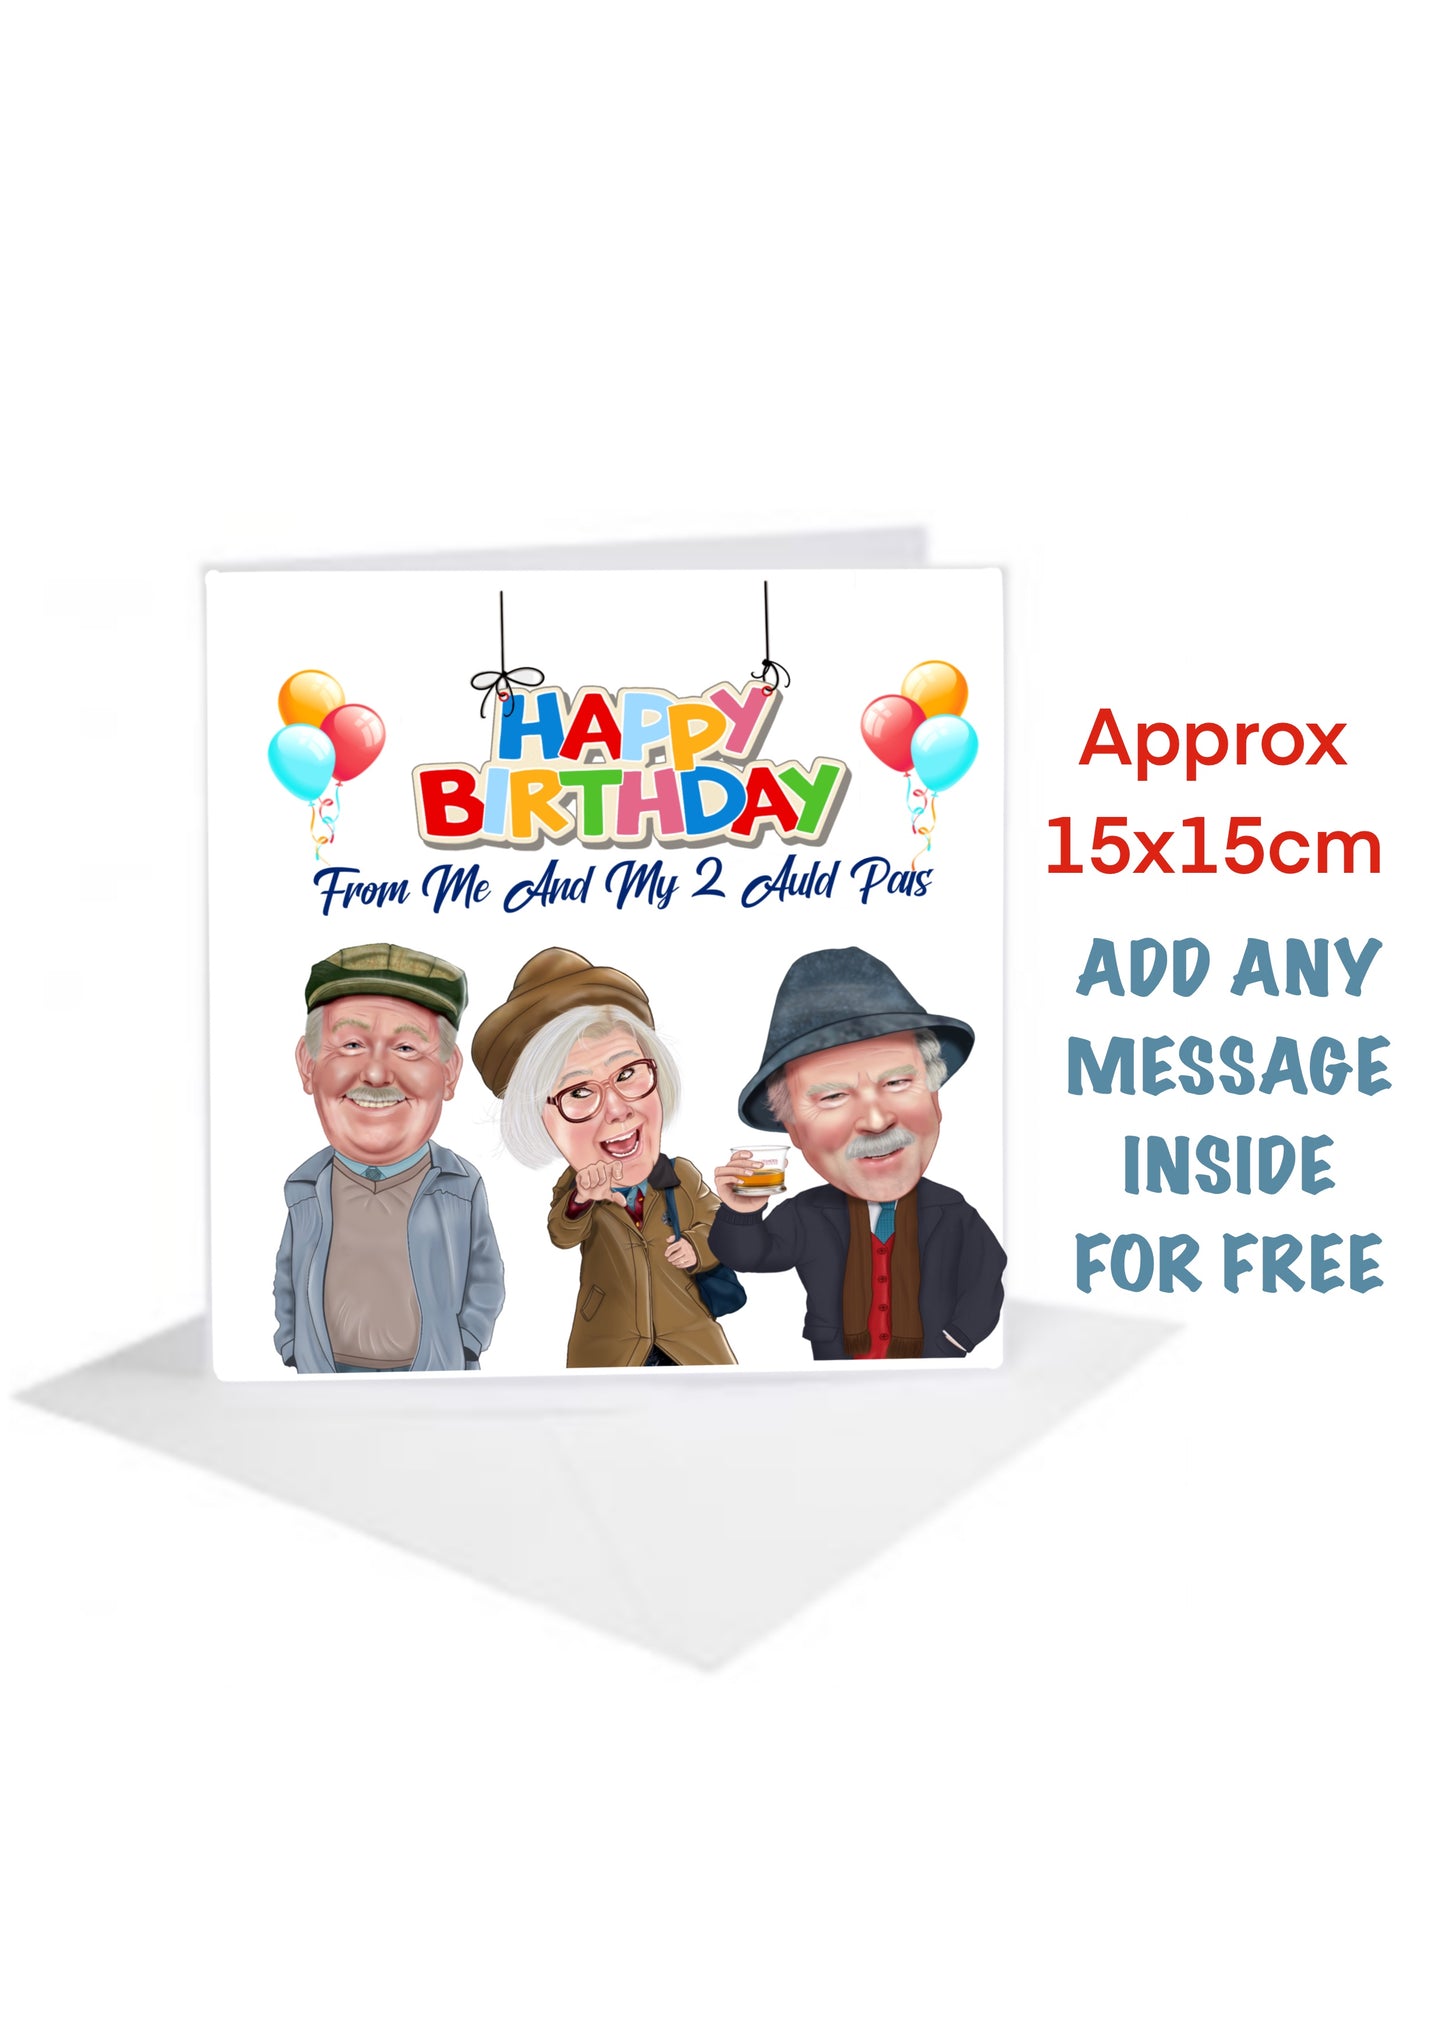 Still Game Cards-Cards birthday jack Victor isa 2 auld pals